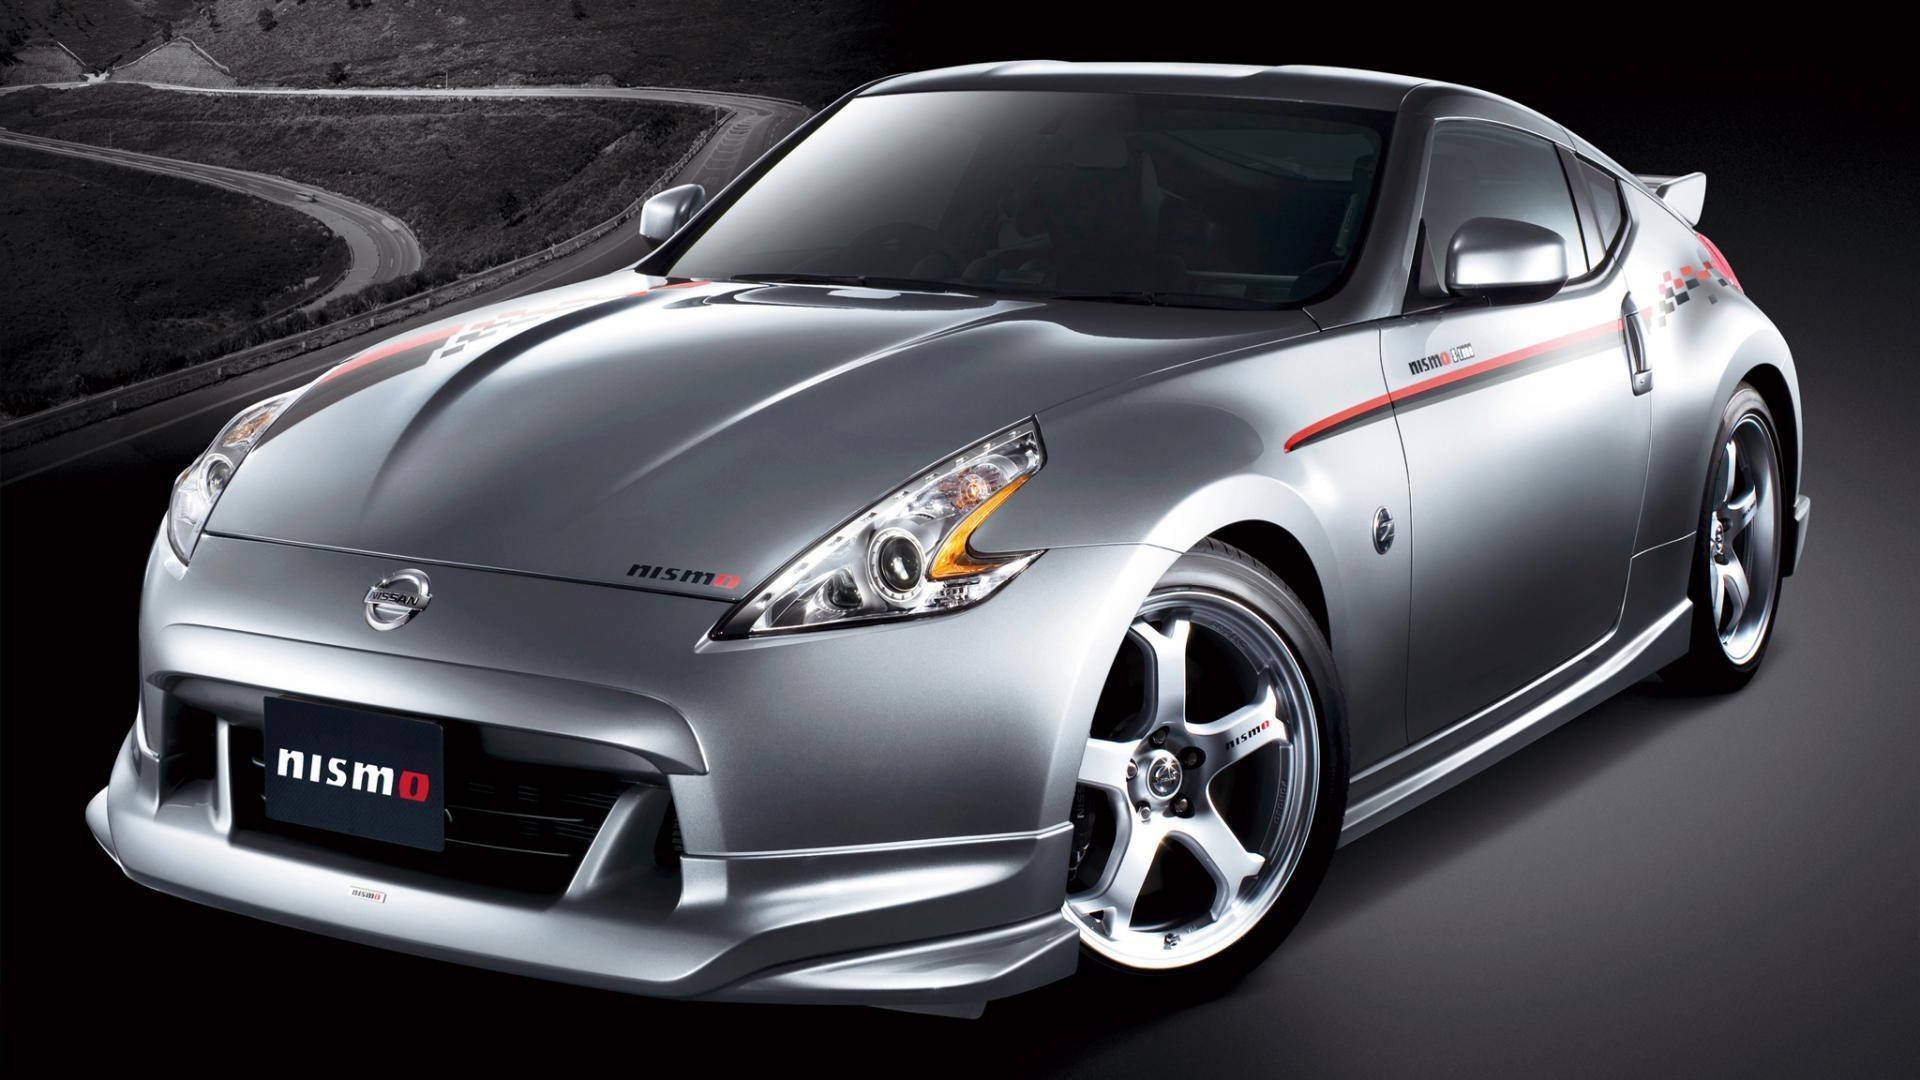 The Definitive Sports Car - The Nissan 350z Wallpaper